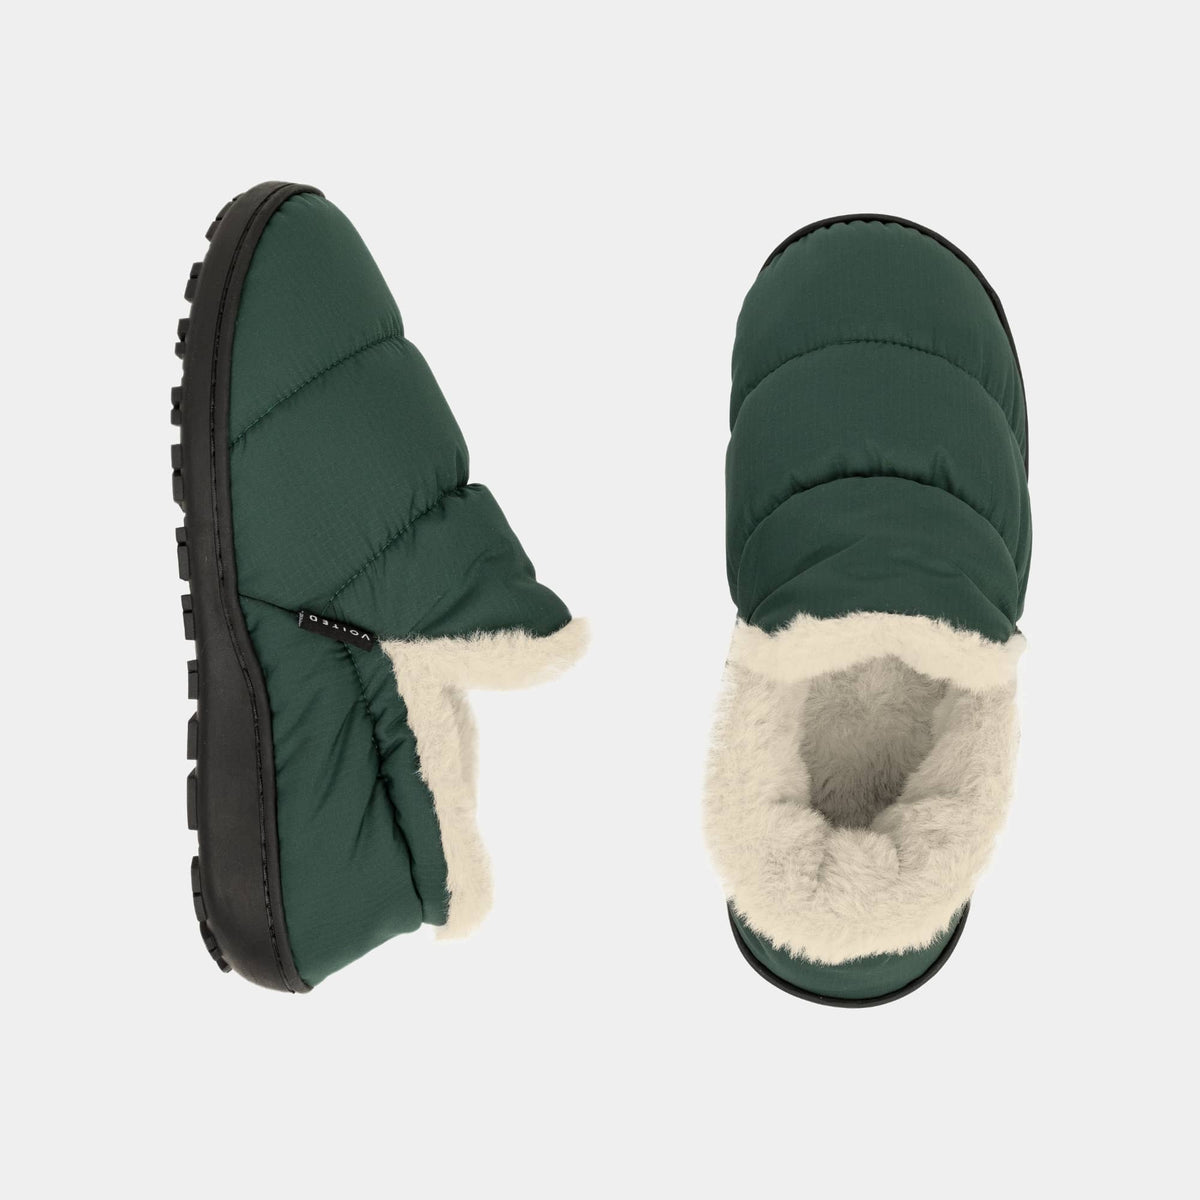 VOITED CloudTouch® Slippers - Lightweight, Indoor/Outdoor Fleece-Lined Camping Slippers - Green Gables Footwear VOITED 